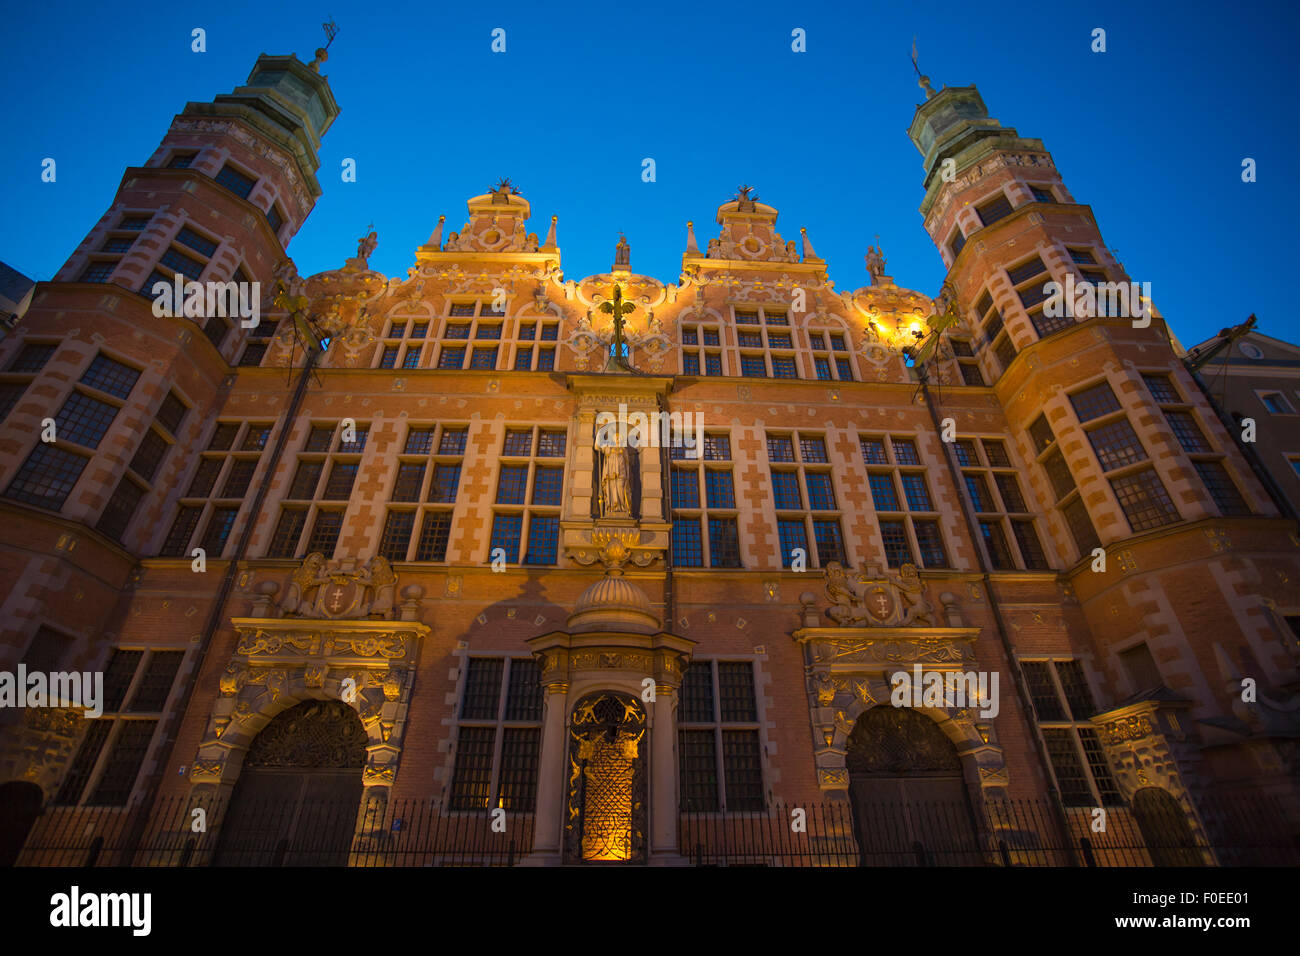 Night photos of the Historical City of Gdansk in Poland with old architecture, art and cultural heritage. Stock Photo